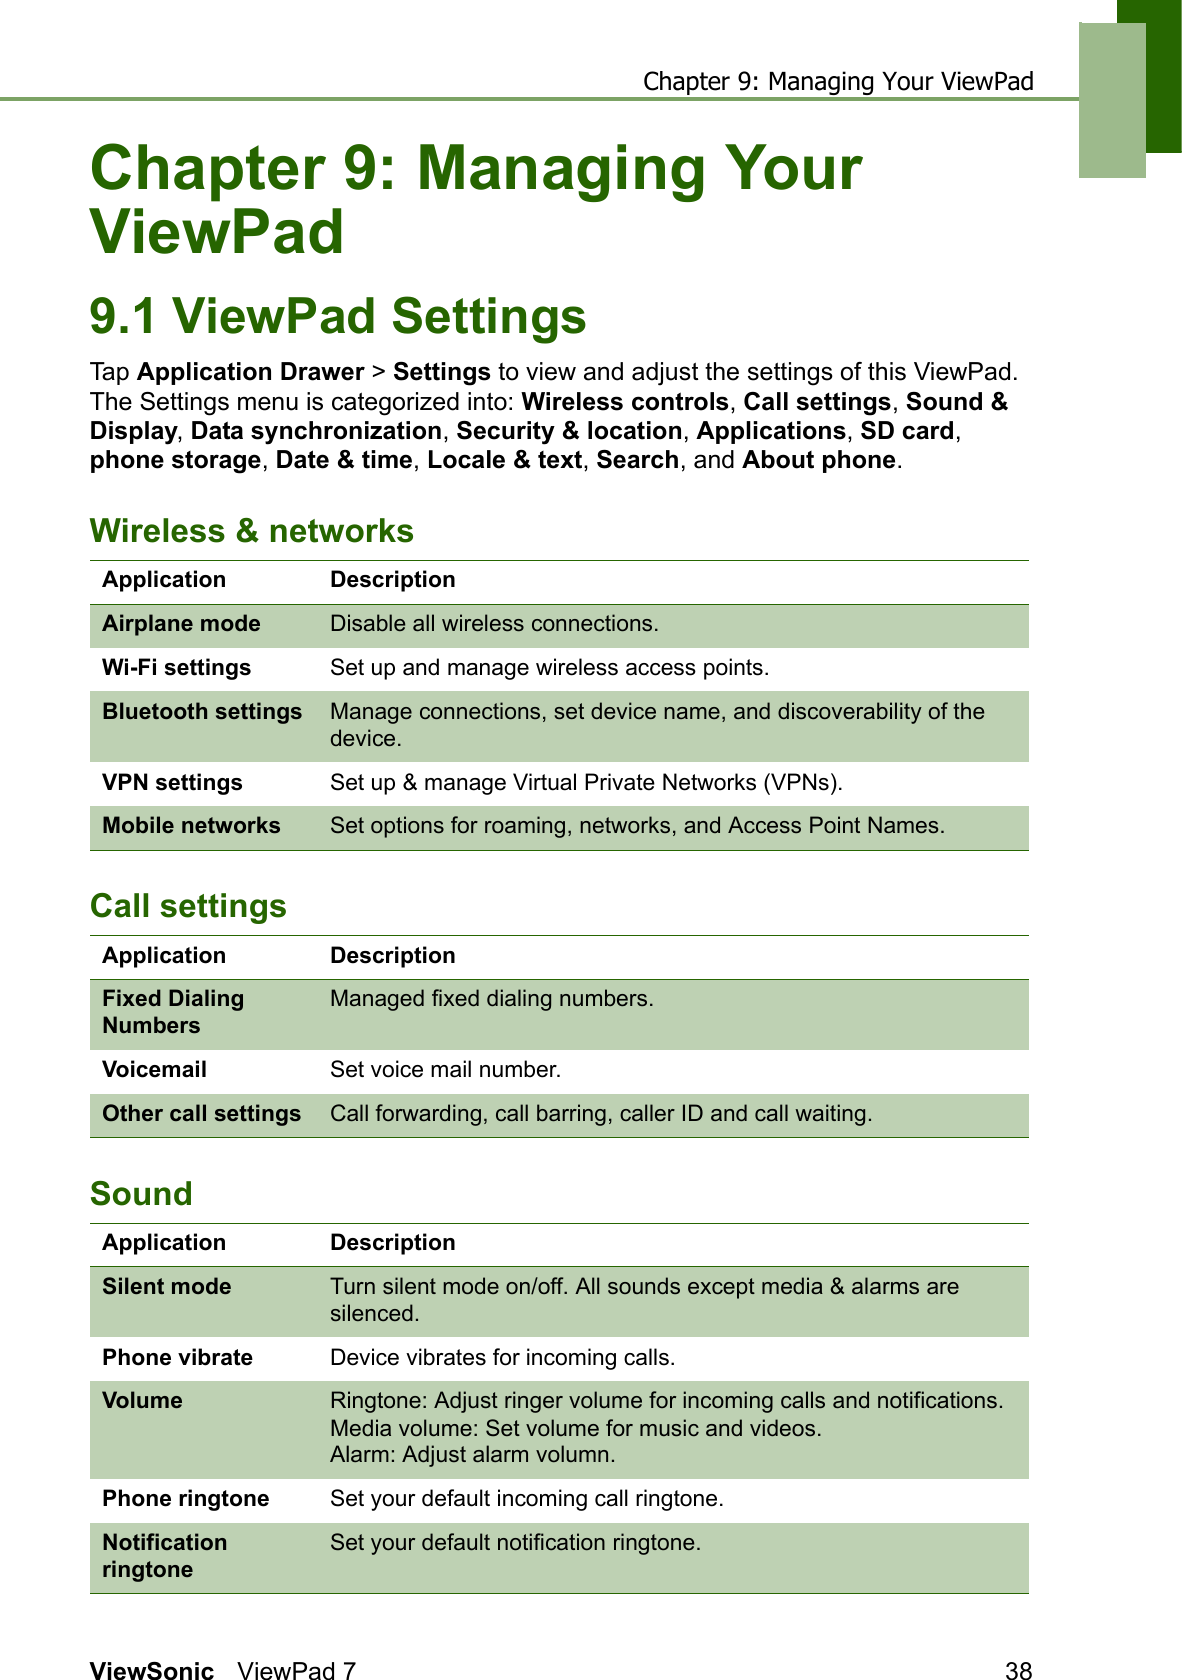 Chapter 9: Managing Your ViewPadViewSonic ViewPad 7 38Chapter 9: Managing Your ViewPad9.1 ViewPad SettingsTap Application Drawer &gt; Settings to view and adjust the settings of this ViewPad. The Settings menu is categorized into: Wireless controls, Call settings, Sound &amp; Display, Data synchronization, Security &amp; location, Applications, SD card, phone storage, Date &amp; time, Locale &amp; text, Search, and About phone.Wireless &amp; networksCall settingsSoundApplication DescriptionAirplane mode Disable all wireless connections.Wi-Fi settings Set up and manage wireless access points.Bluetooth settings Manage connections, set device name, and discoverability of the device.VPN settings Set up &amp; manage Virtual Private Networks (VPNs).Mobile networks Set options for roaming, networks, and Access Point Names.Application DescriptionFixed Dialing NumbersManaged fixed dialing numbers.Voicemail Set voice mail number.Other call settings Call forwarding, call barring, caller ID and call waiting.Application DescriptionSilent mode Turn silent mode on/off. All sounds except media &amp; alarms are silenced.Phone vibrate Device vibrates for incoming calls.Volume Ringtone: Adjust ringer volume for incoming calls and notifications.Media volume: Set volume for music and videos.Alarm: Adjust alarm volumn.Phone ringtone Set your default incoming call ringtone.Notification ringtoneSet your default notification ringtone.